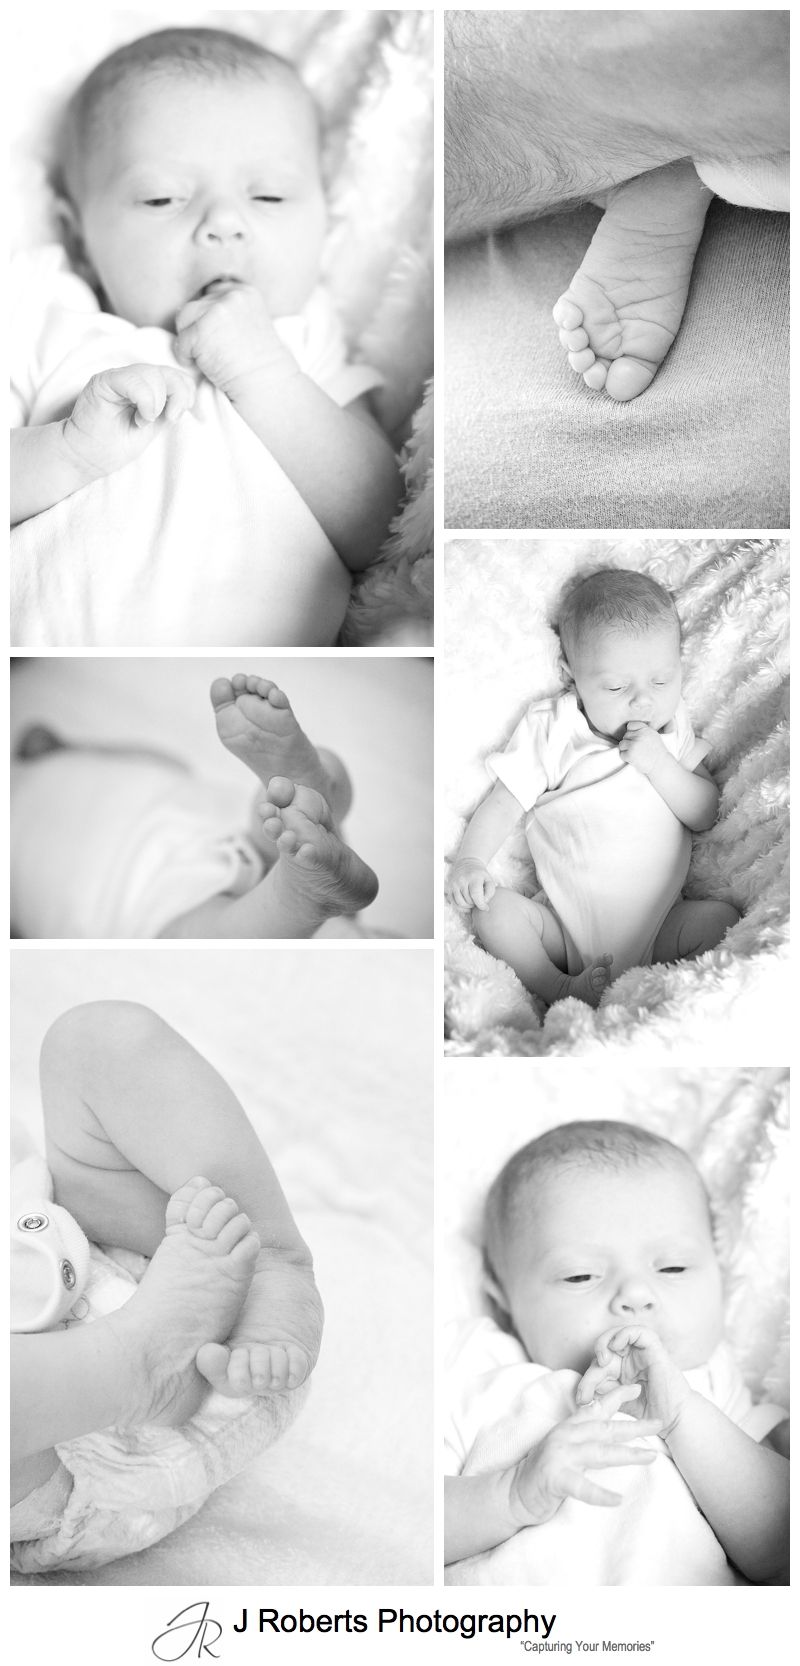 B&W details photographs of a baby girl - sydney baby portrait photography